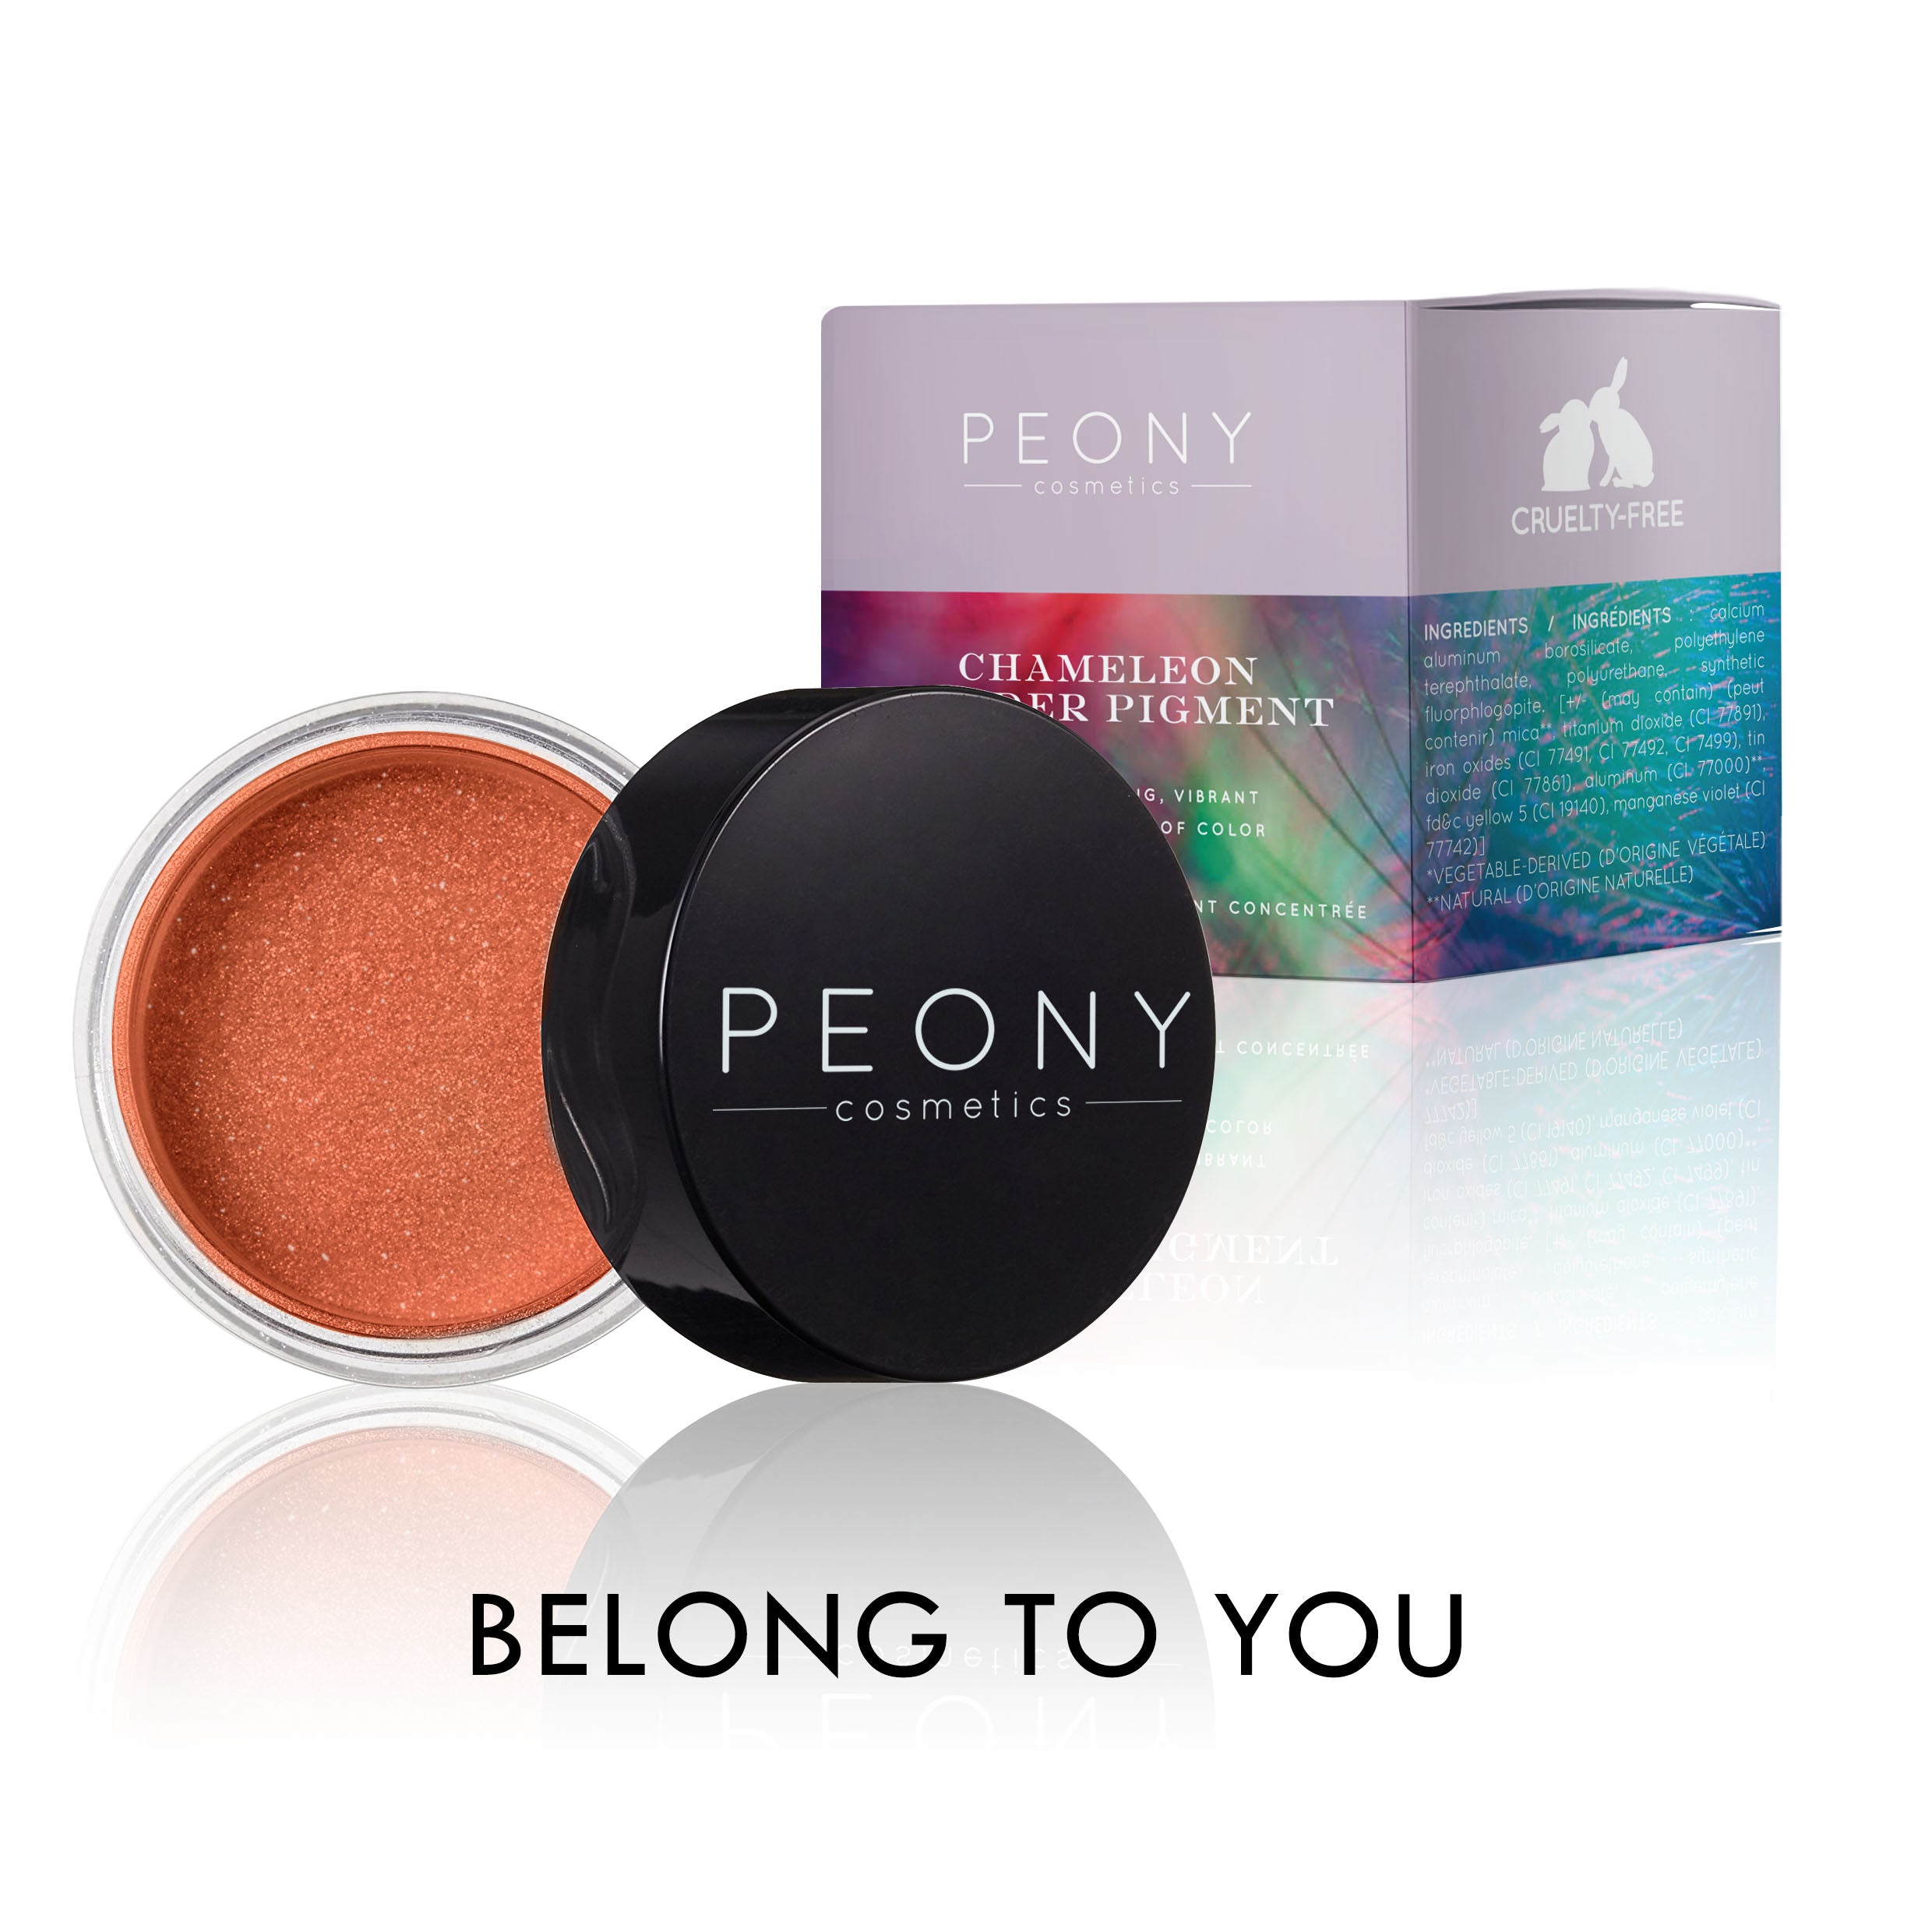 Chameleon Powder Pigment - For A Captivating, Vibrant And Intense Wash Of Color